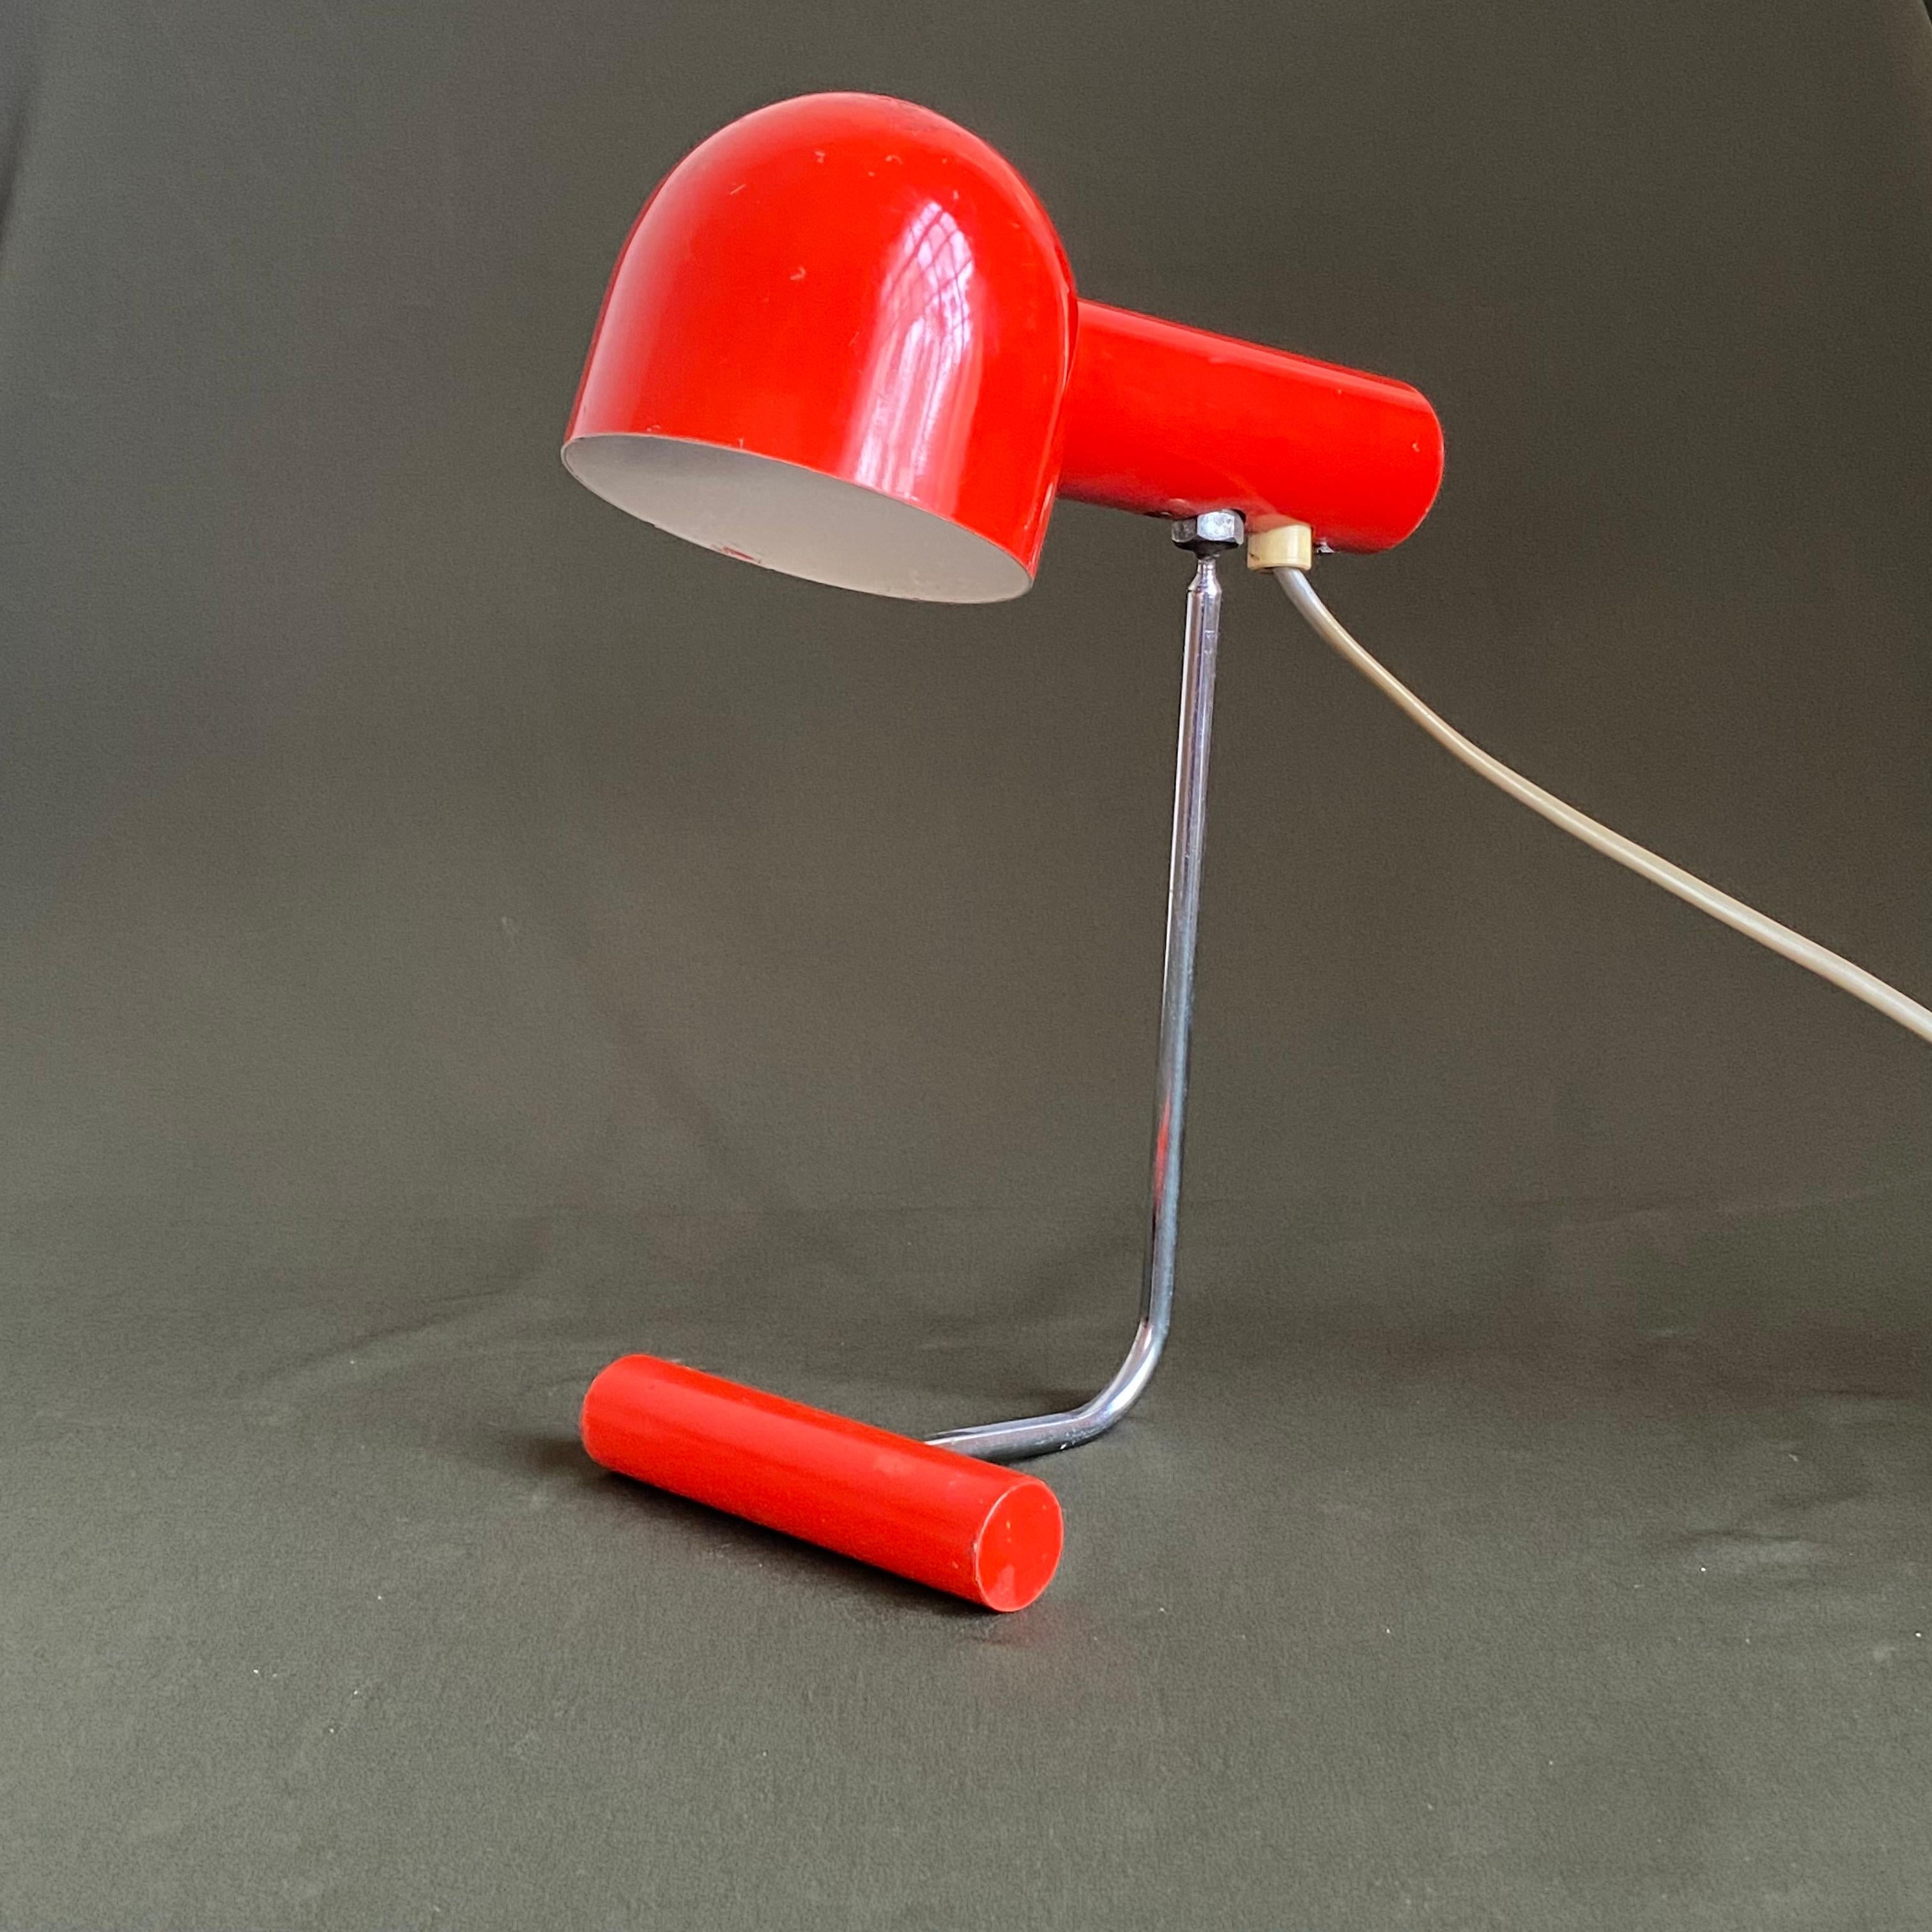 Red table or desk lamp in painted aluminum and chrome plated steel. 
Very nice condition.
Produced in 1960s by Napako, Czechoslovakia. 
Design attributed to Josef Hurka.